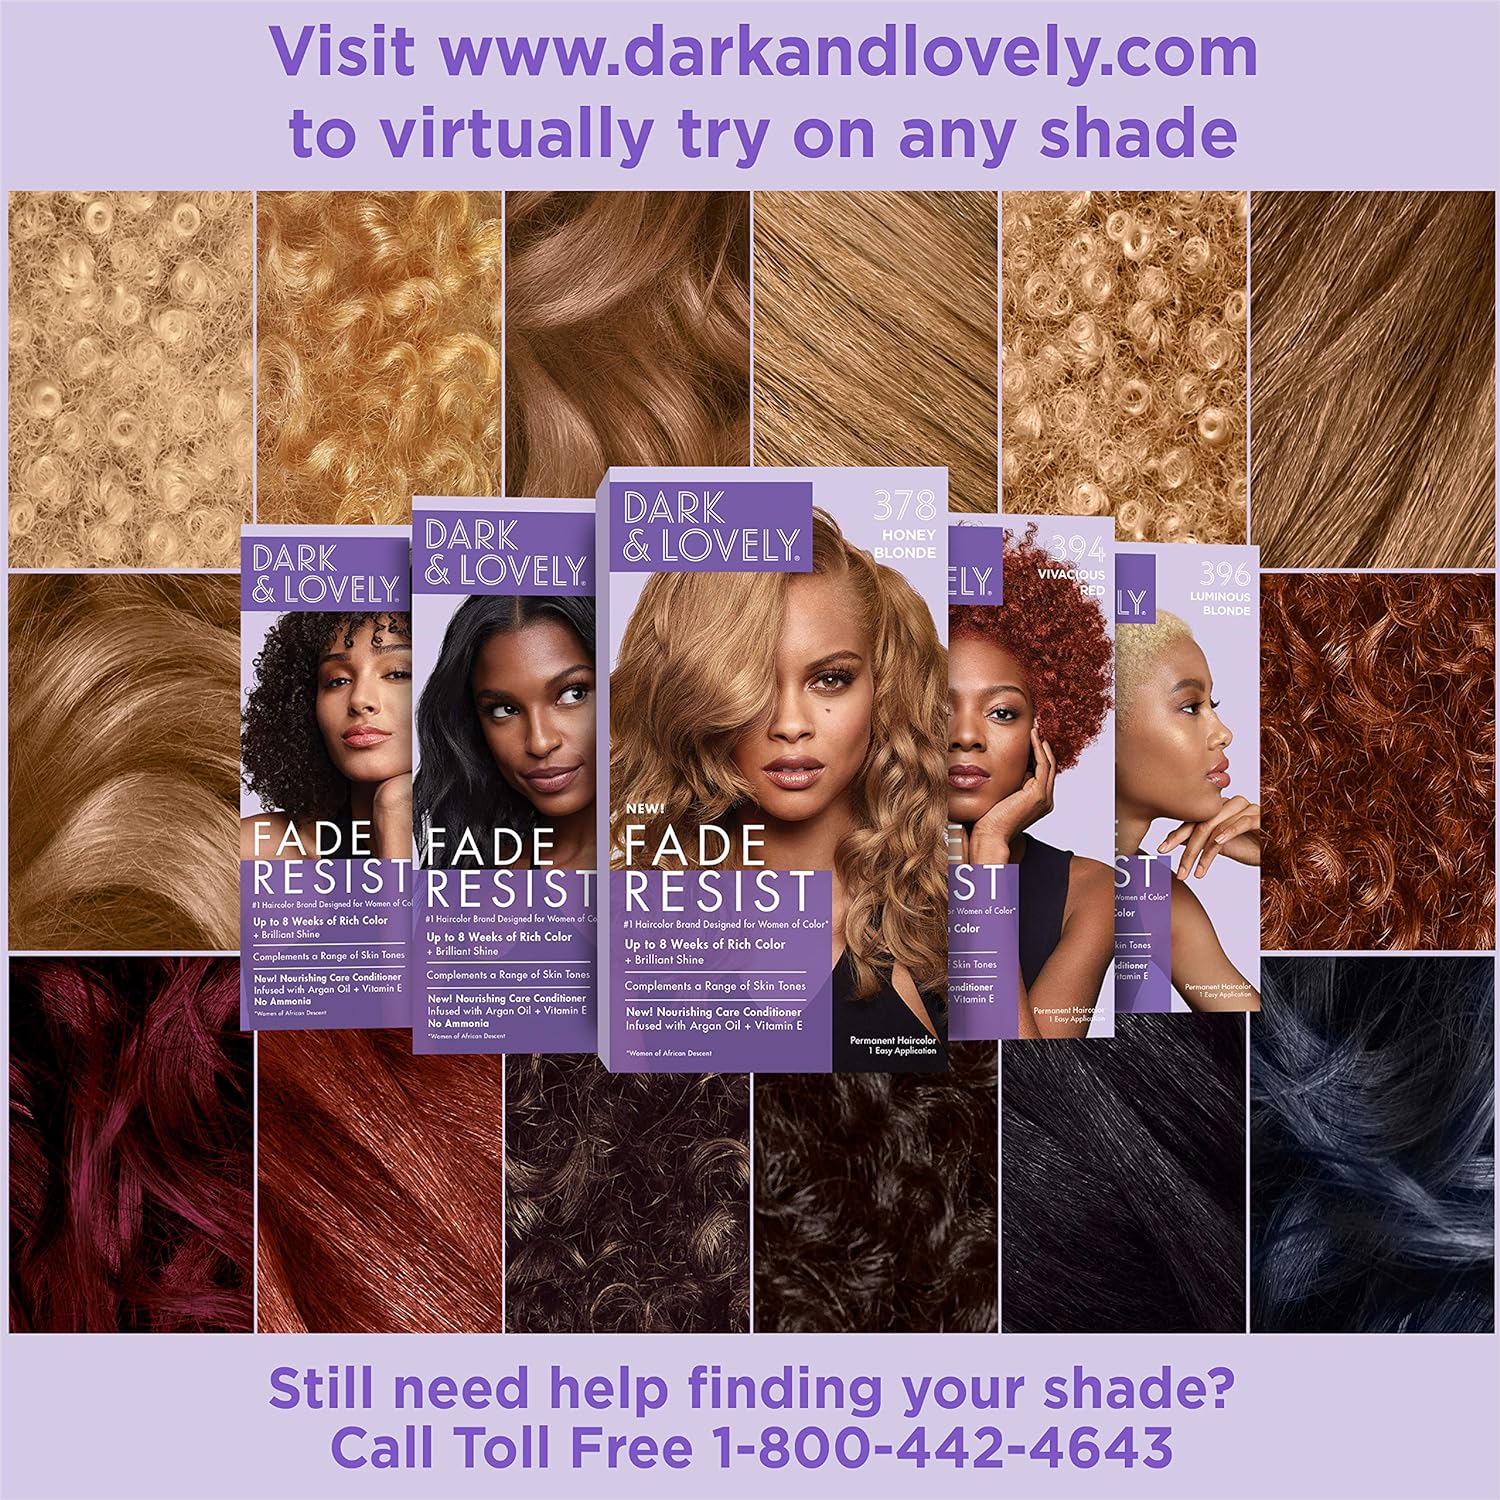 SoftSheen-Carson Dark and Lovely Fade Resist Rich Conditioning Hair Color, Permanent Hair Color, Up To 100 percent Gray Coverage, Brilliant Shine with Argan Oil and Vitamin E, Honey Blonde : Chemical Hair Dyes : Beauty & Personal Care